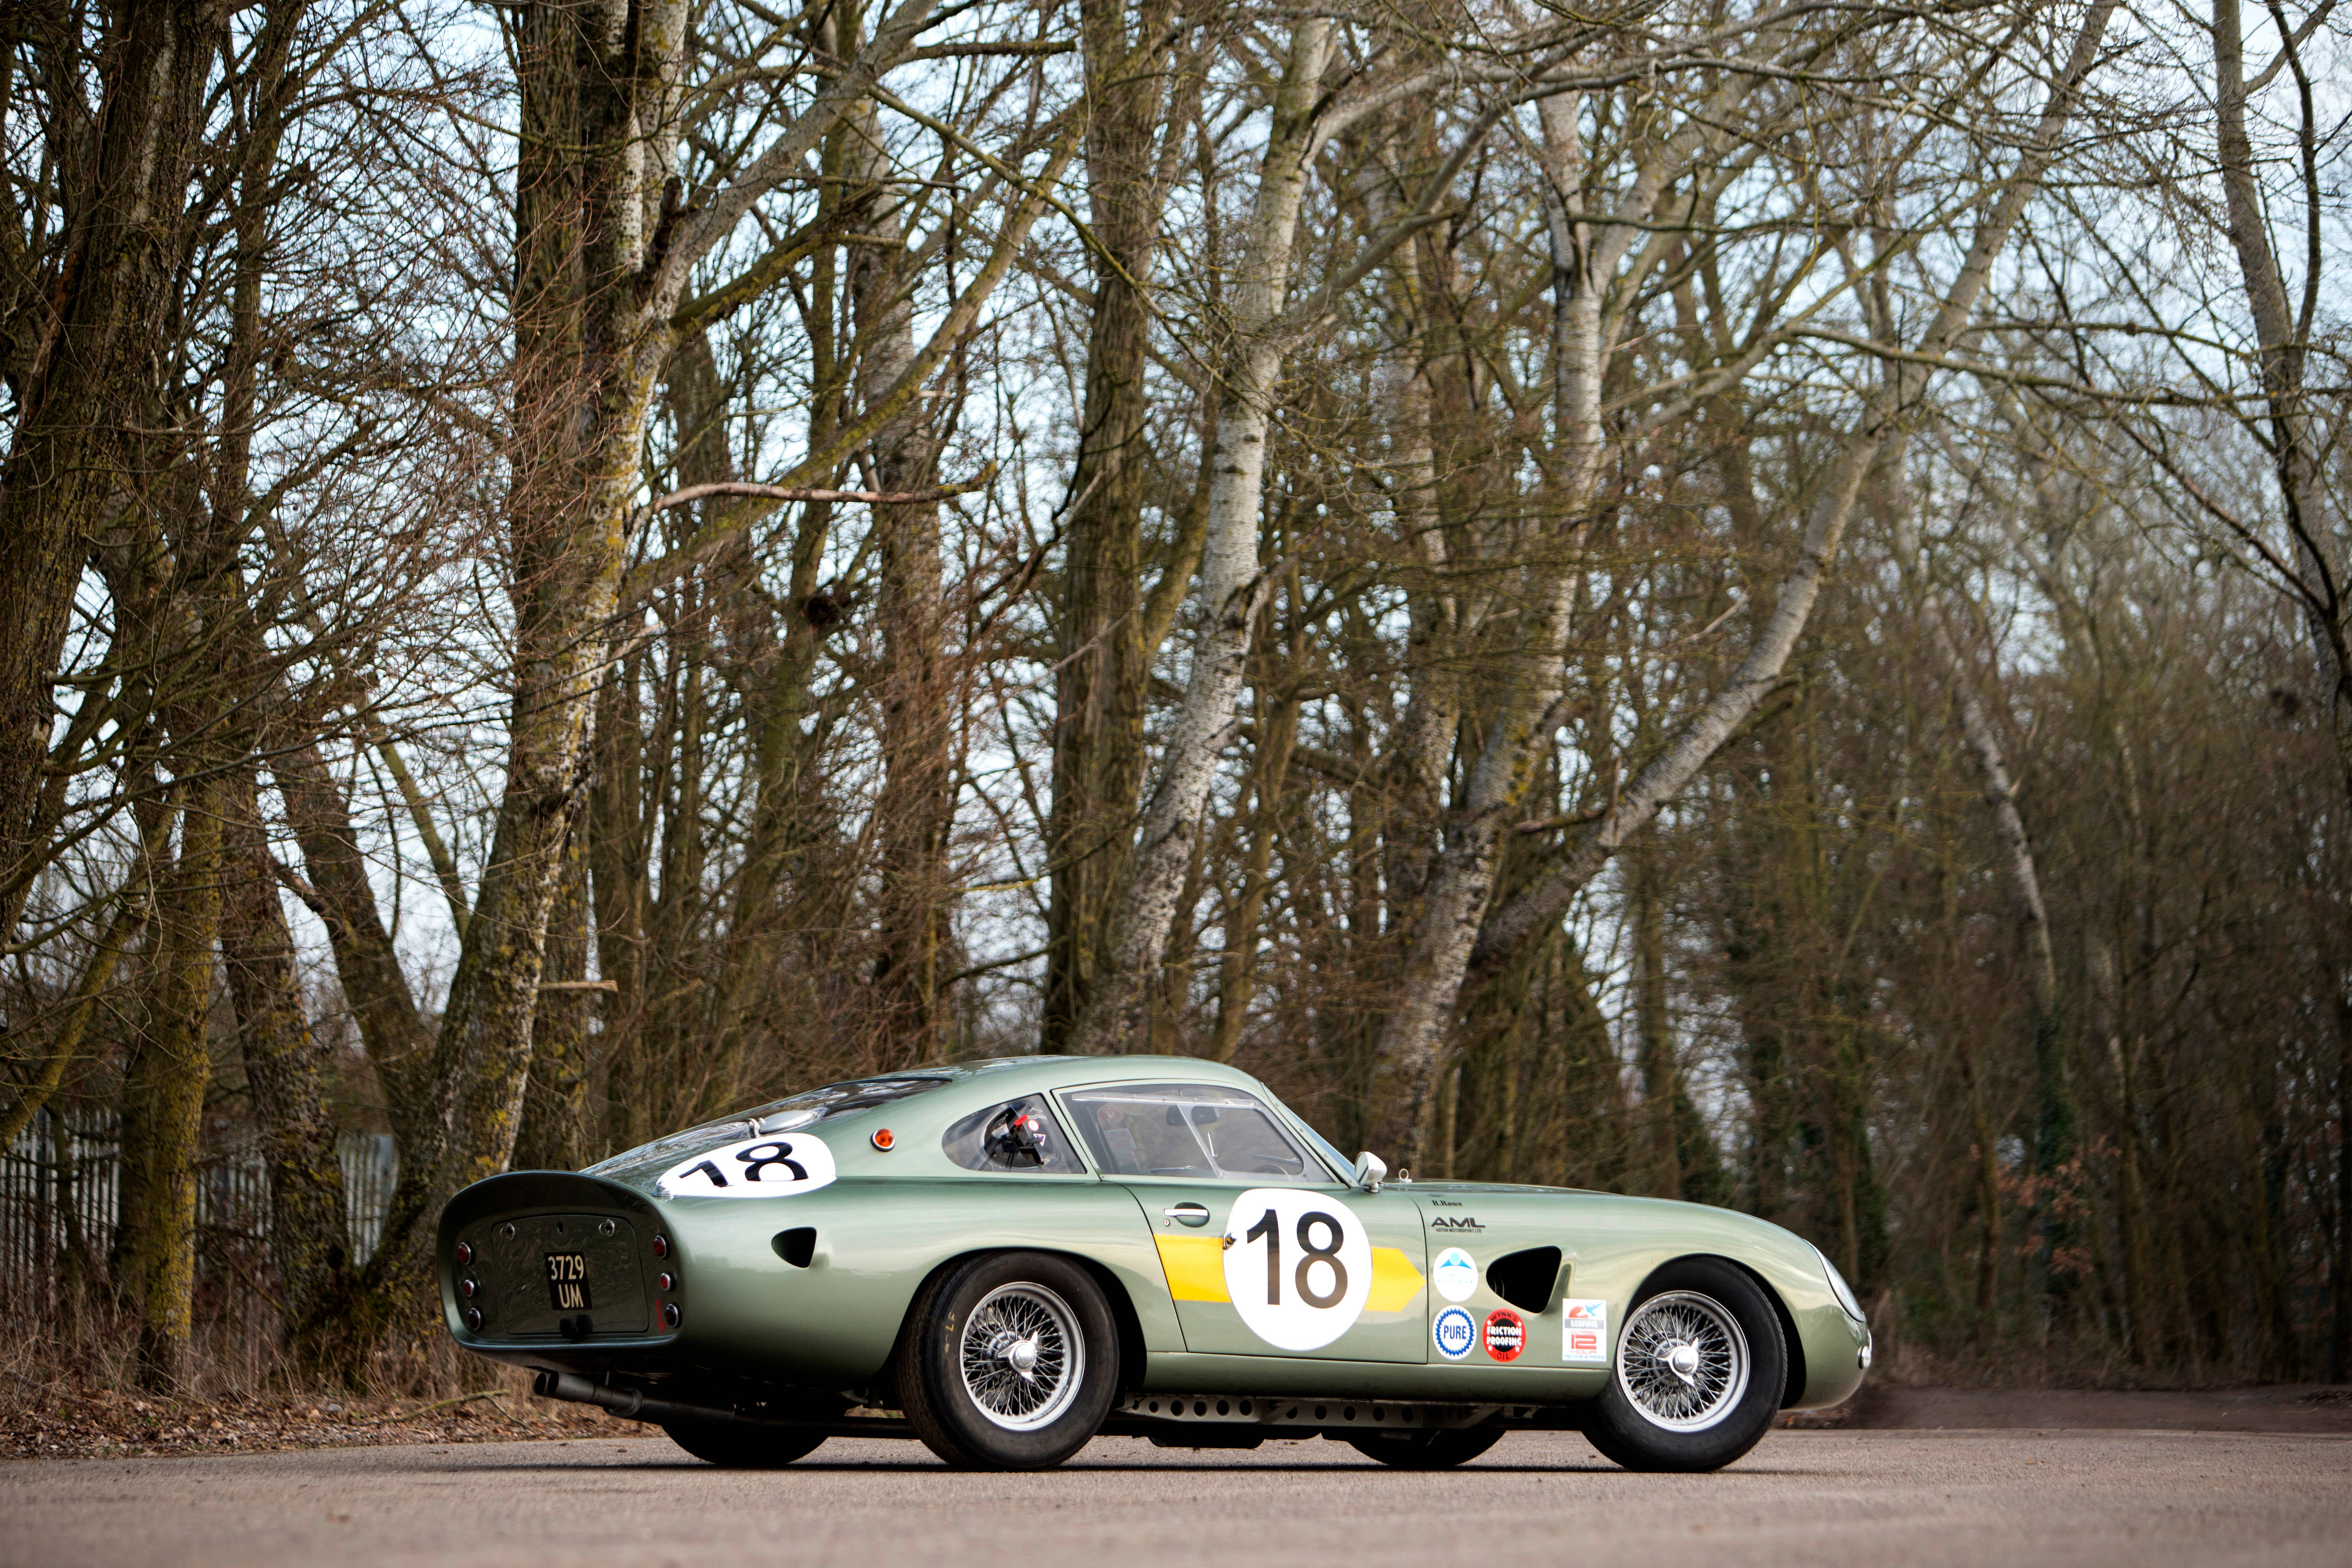 TRACKSIDE TRIUMPH – BRITISH MARQUES STEAL THE SHOW AT BONHAMS GOODWOOD SALE  cover